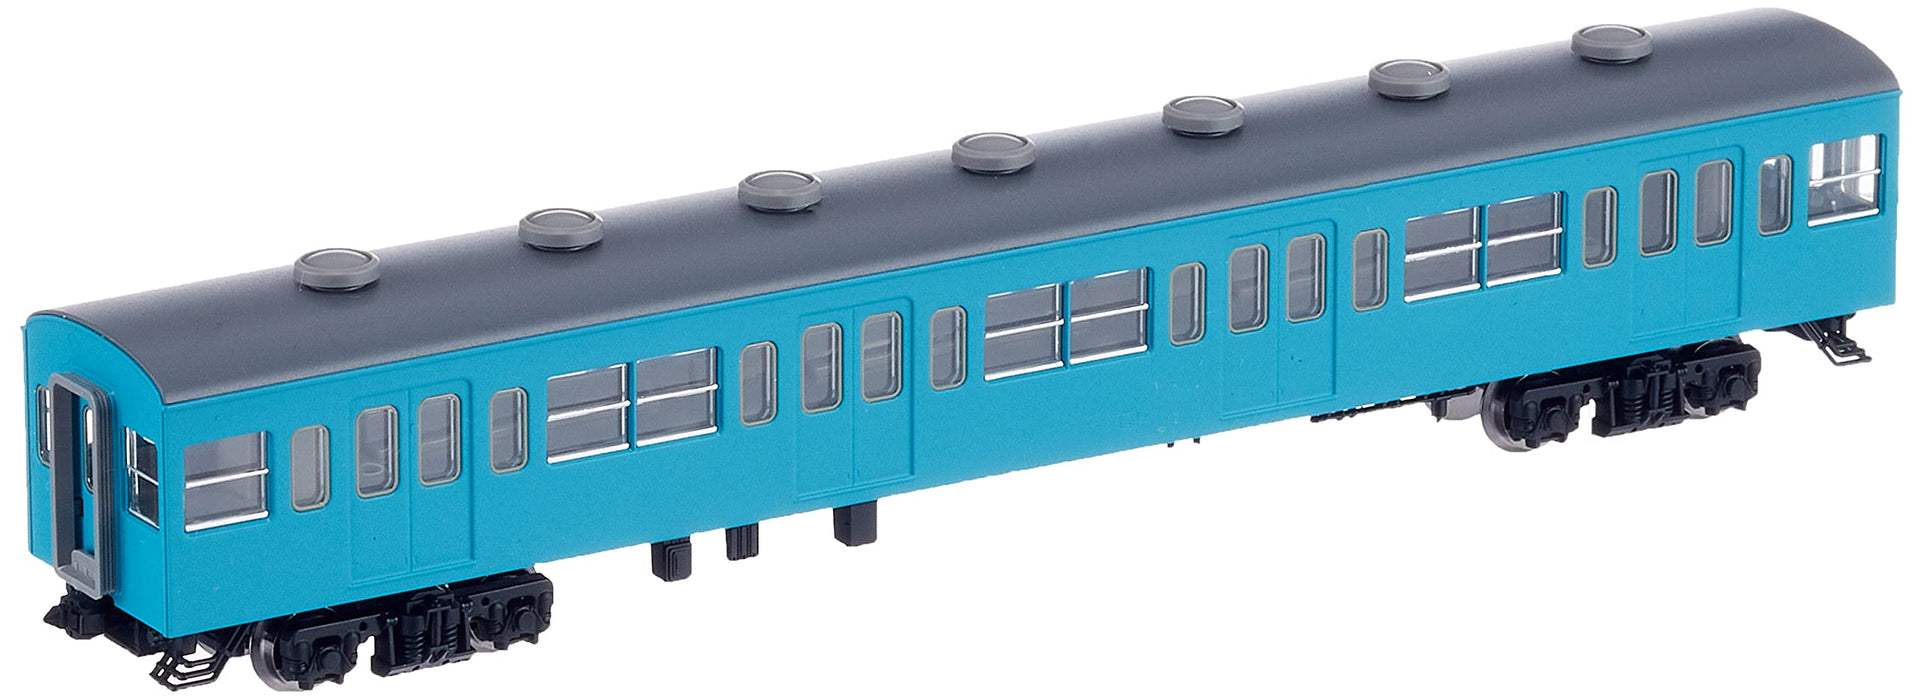 Tomytec Tomix N Gauge Saha 103 Early Model Train Non-Air-Conditioned Sky Blue 9008